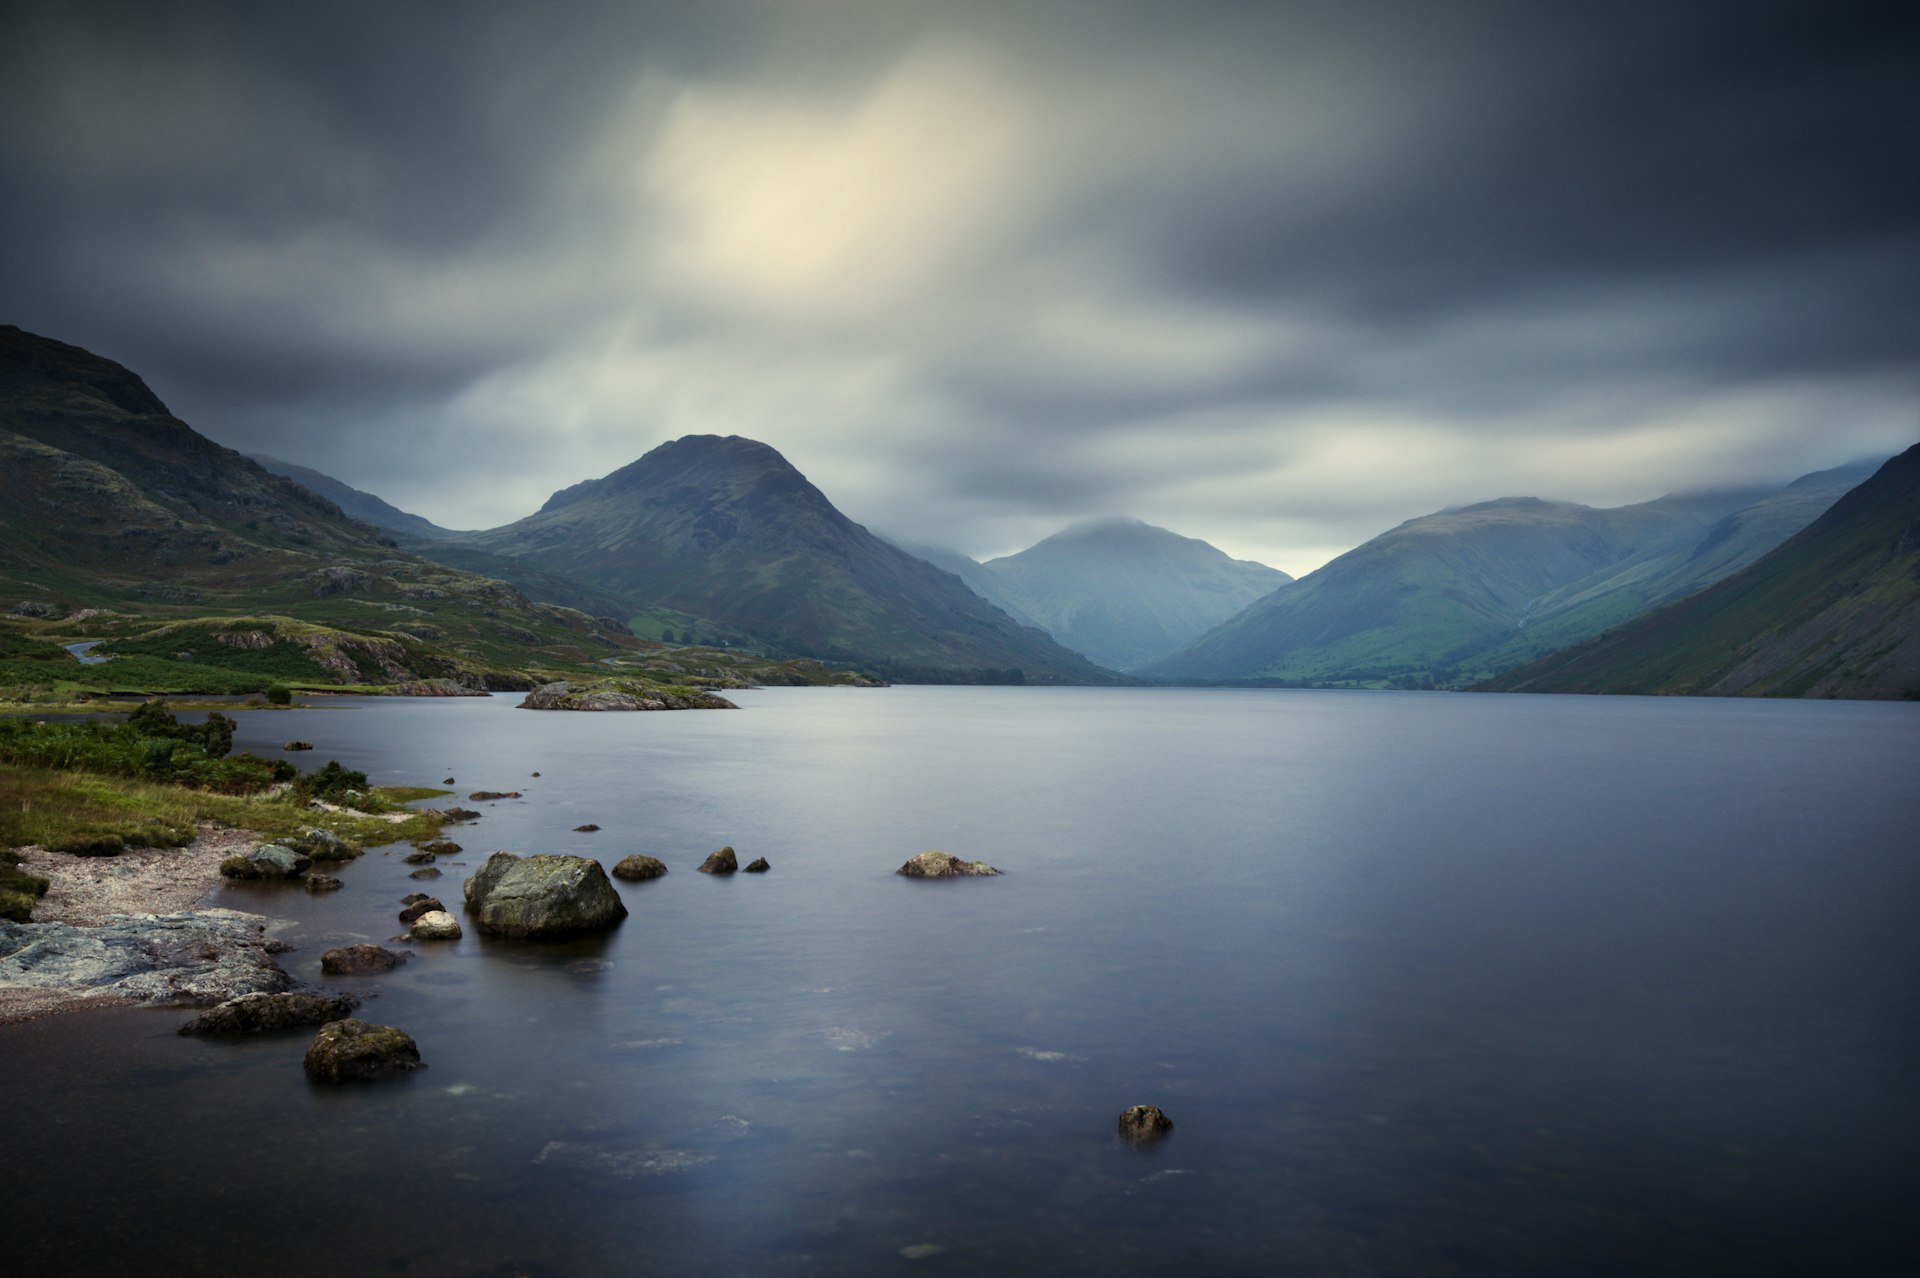 A shot a vast empty lake surrounded by peaks. The light is quite grey and moody